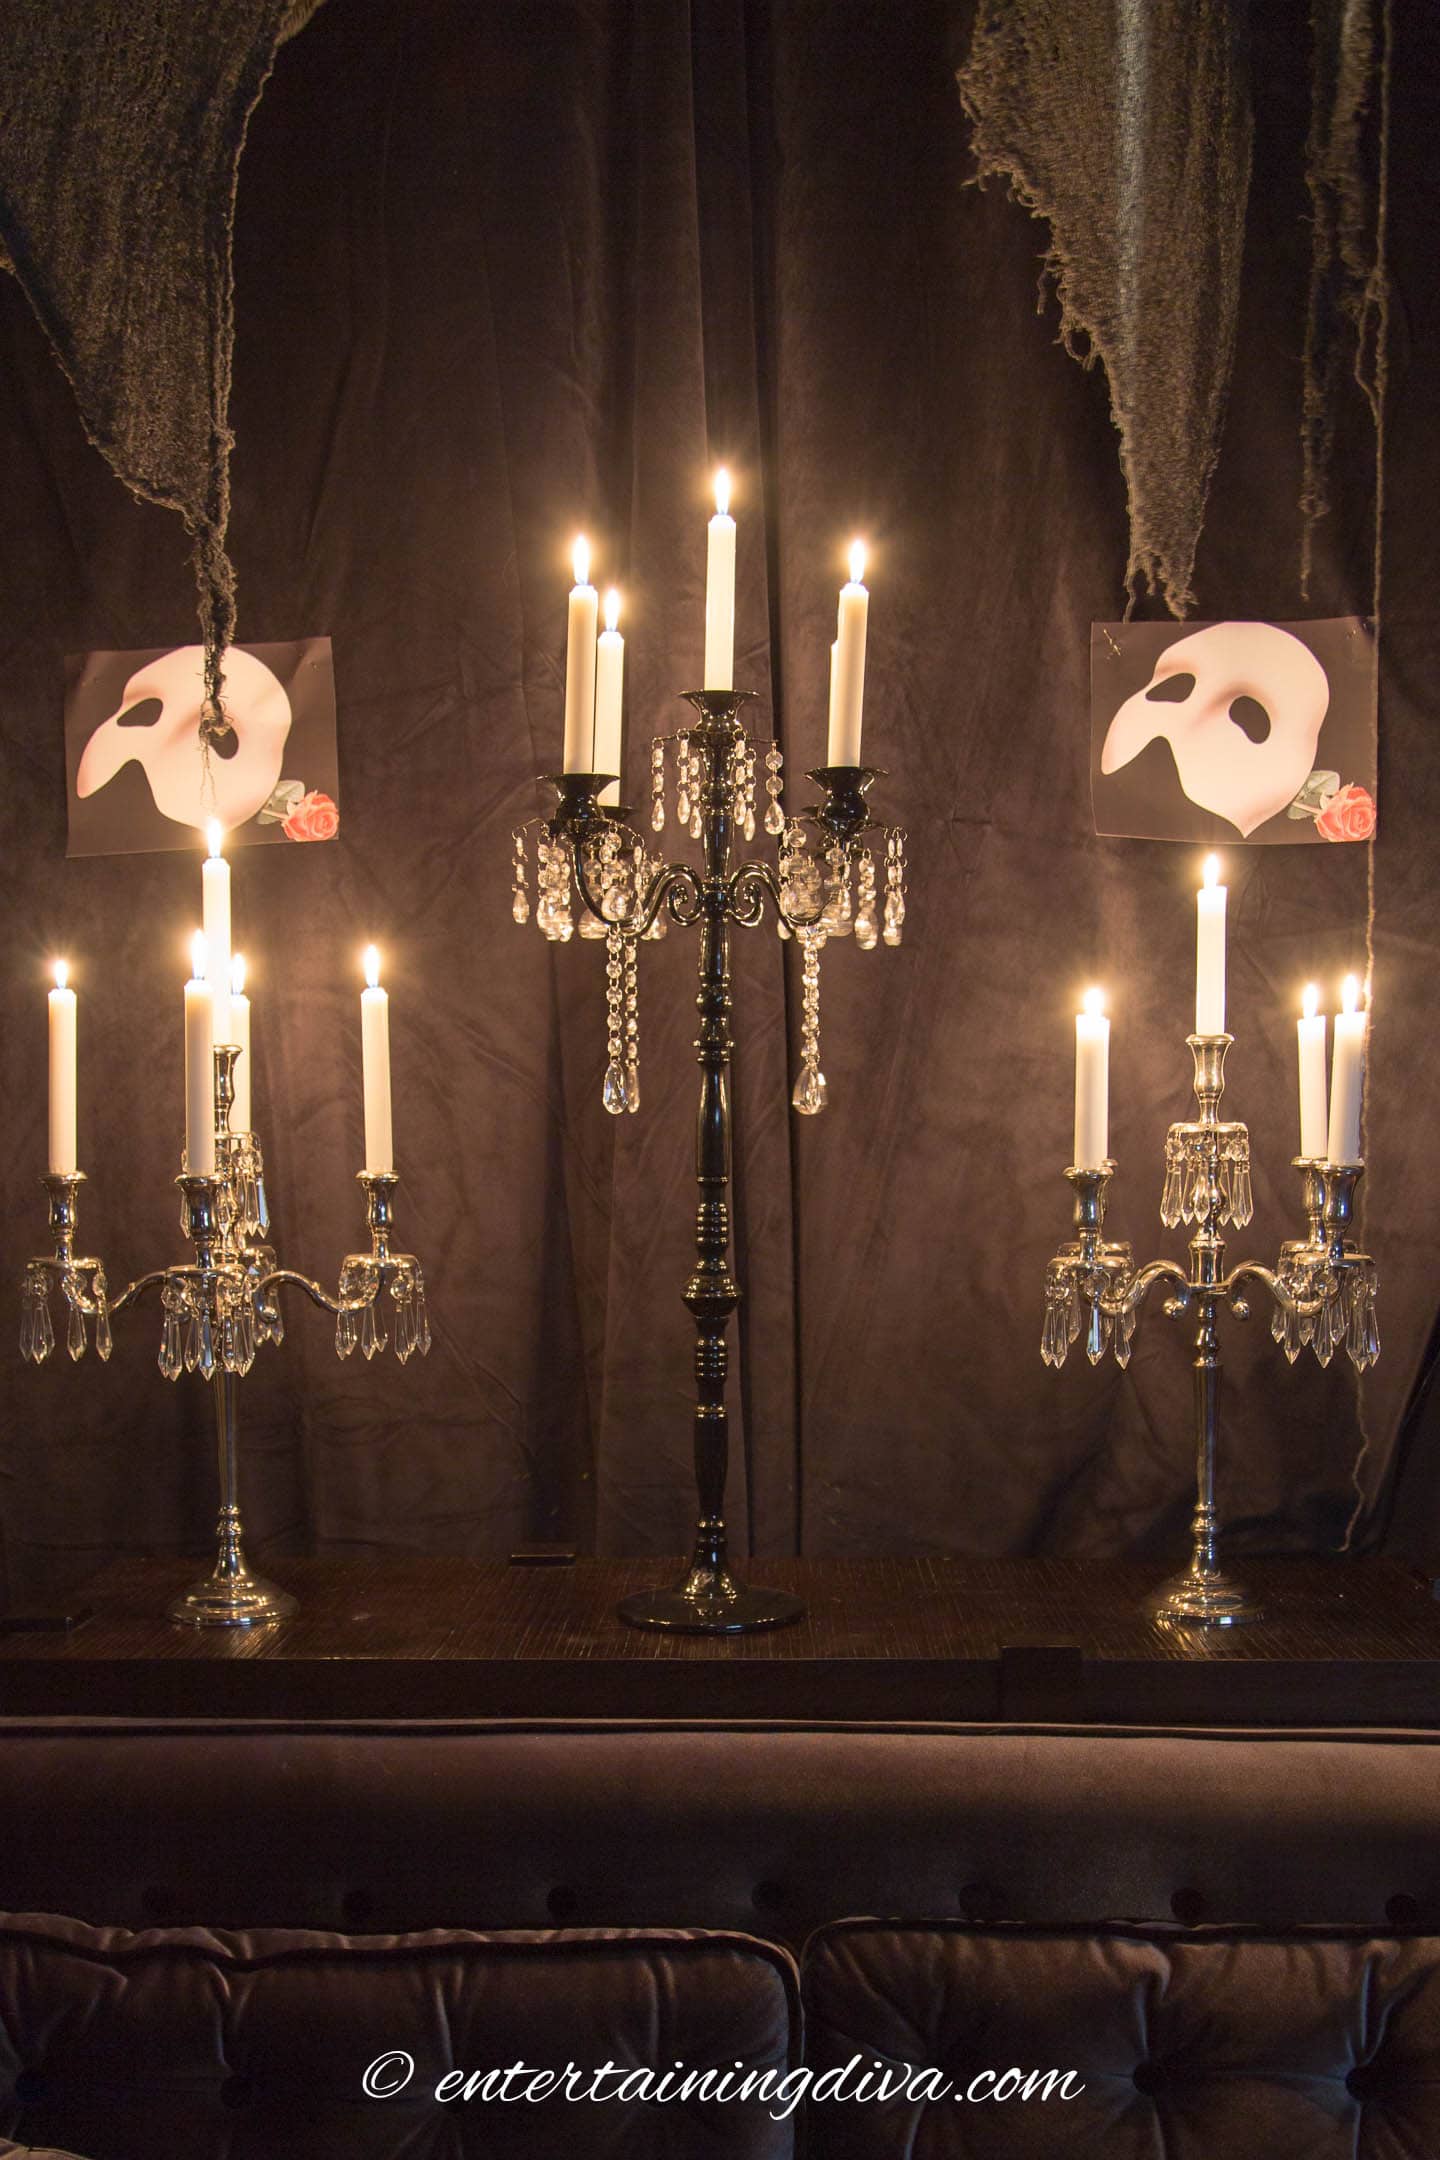 Candelabras in front of black velvet curtains with pictures of Phantom of the Opera masks on them